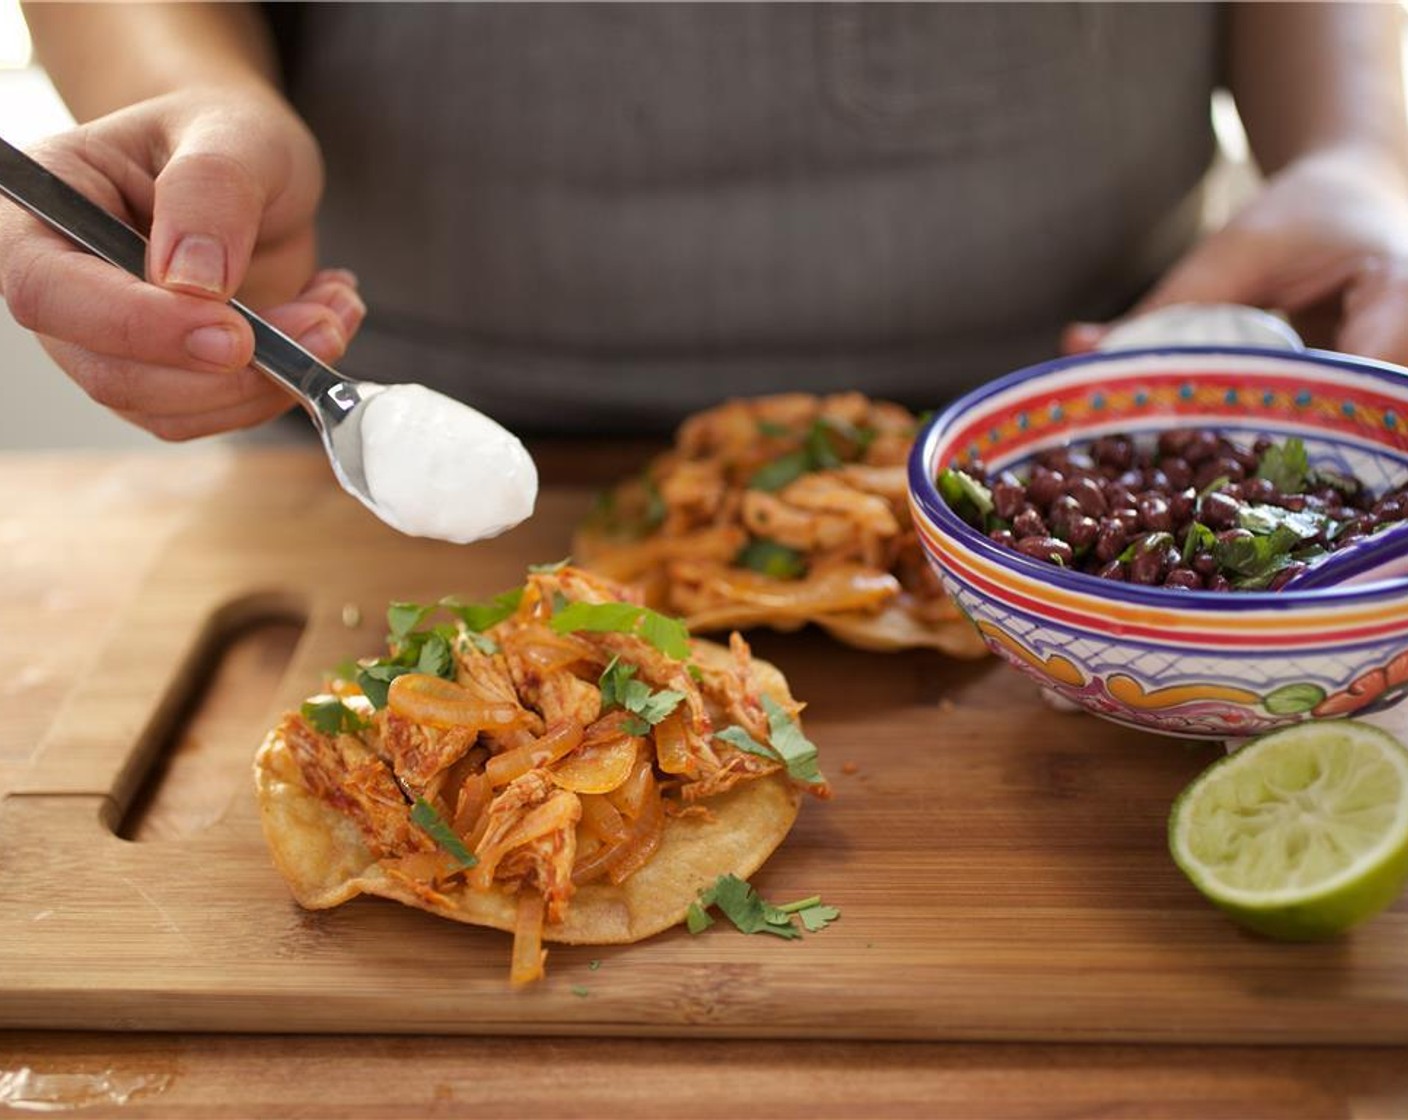 step 19 Divide the tostada shells between two plates. Spread Sour Cream (1/2 cup) over the tostada shells and top each shell with chicken tinga mixture and remaining cilantro. Place the black beans in a small bowl on the side.